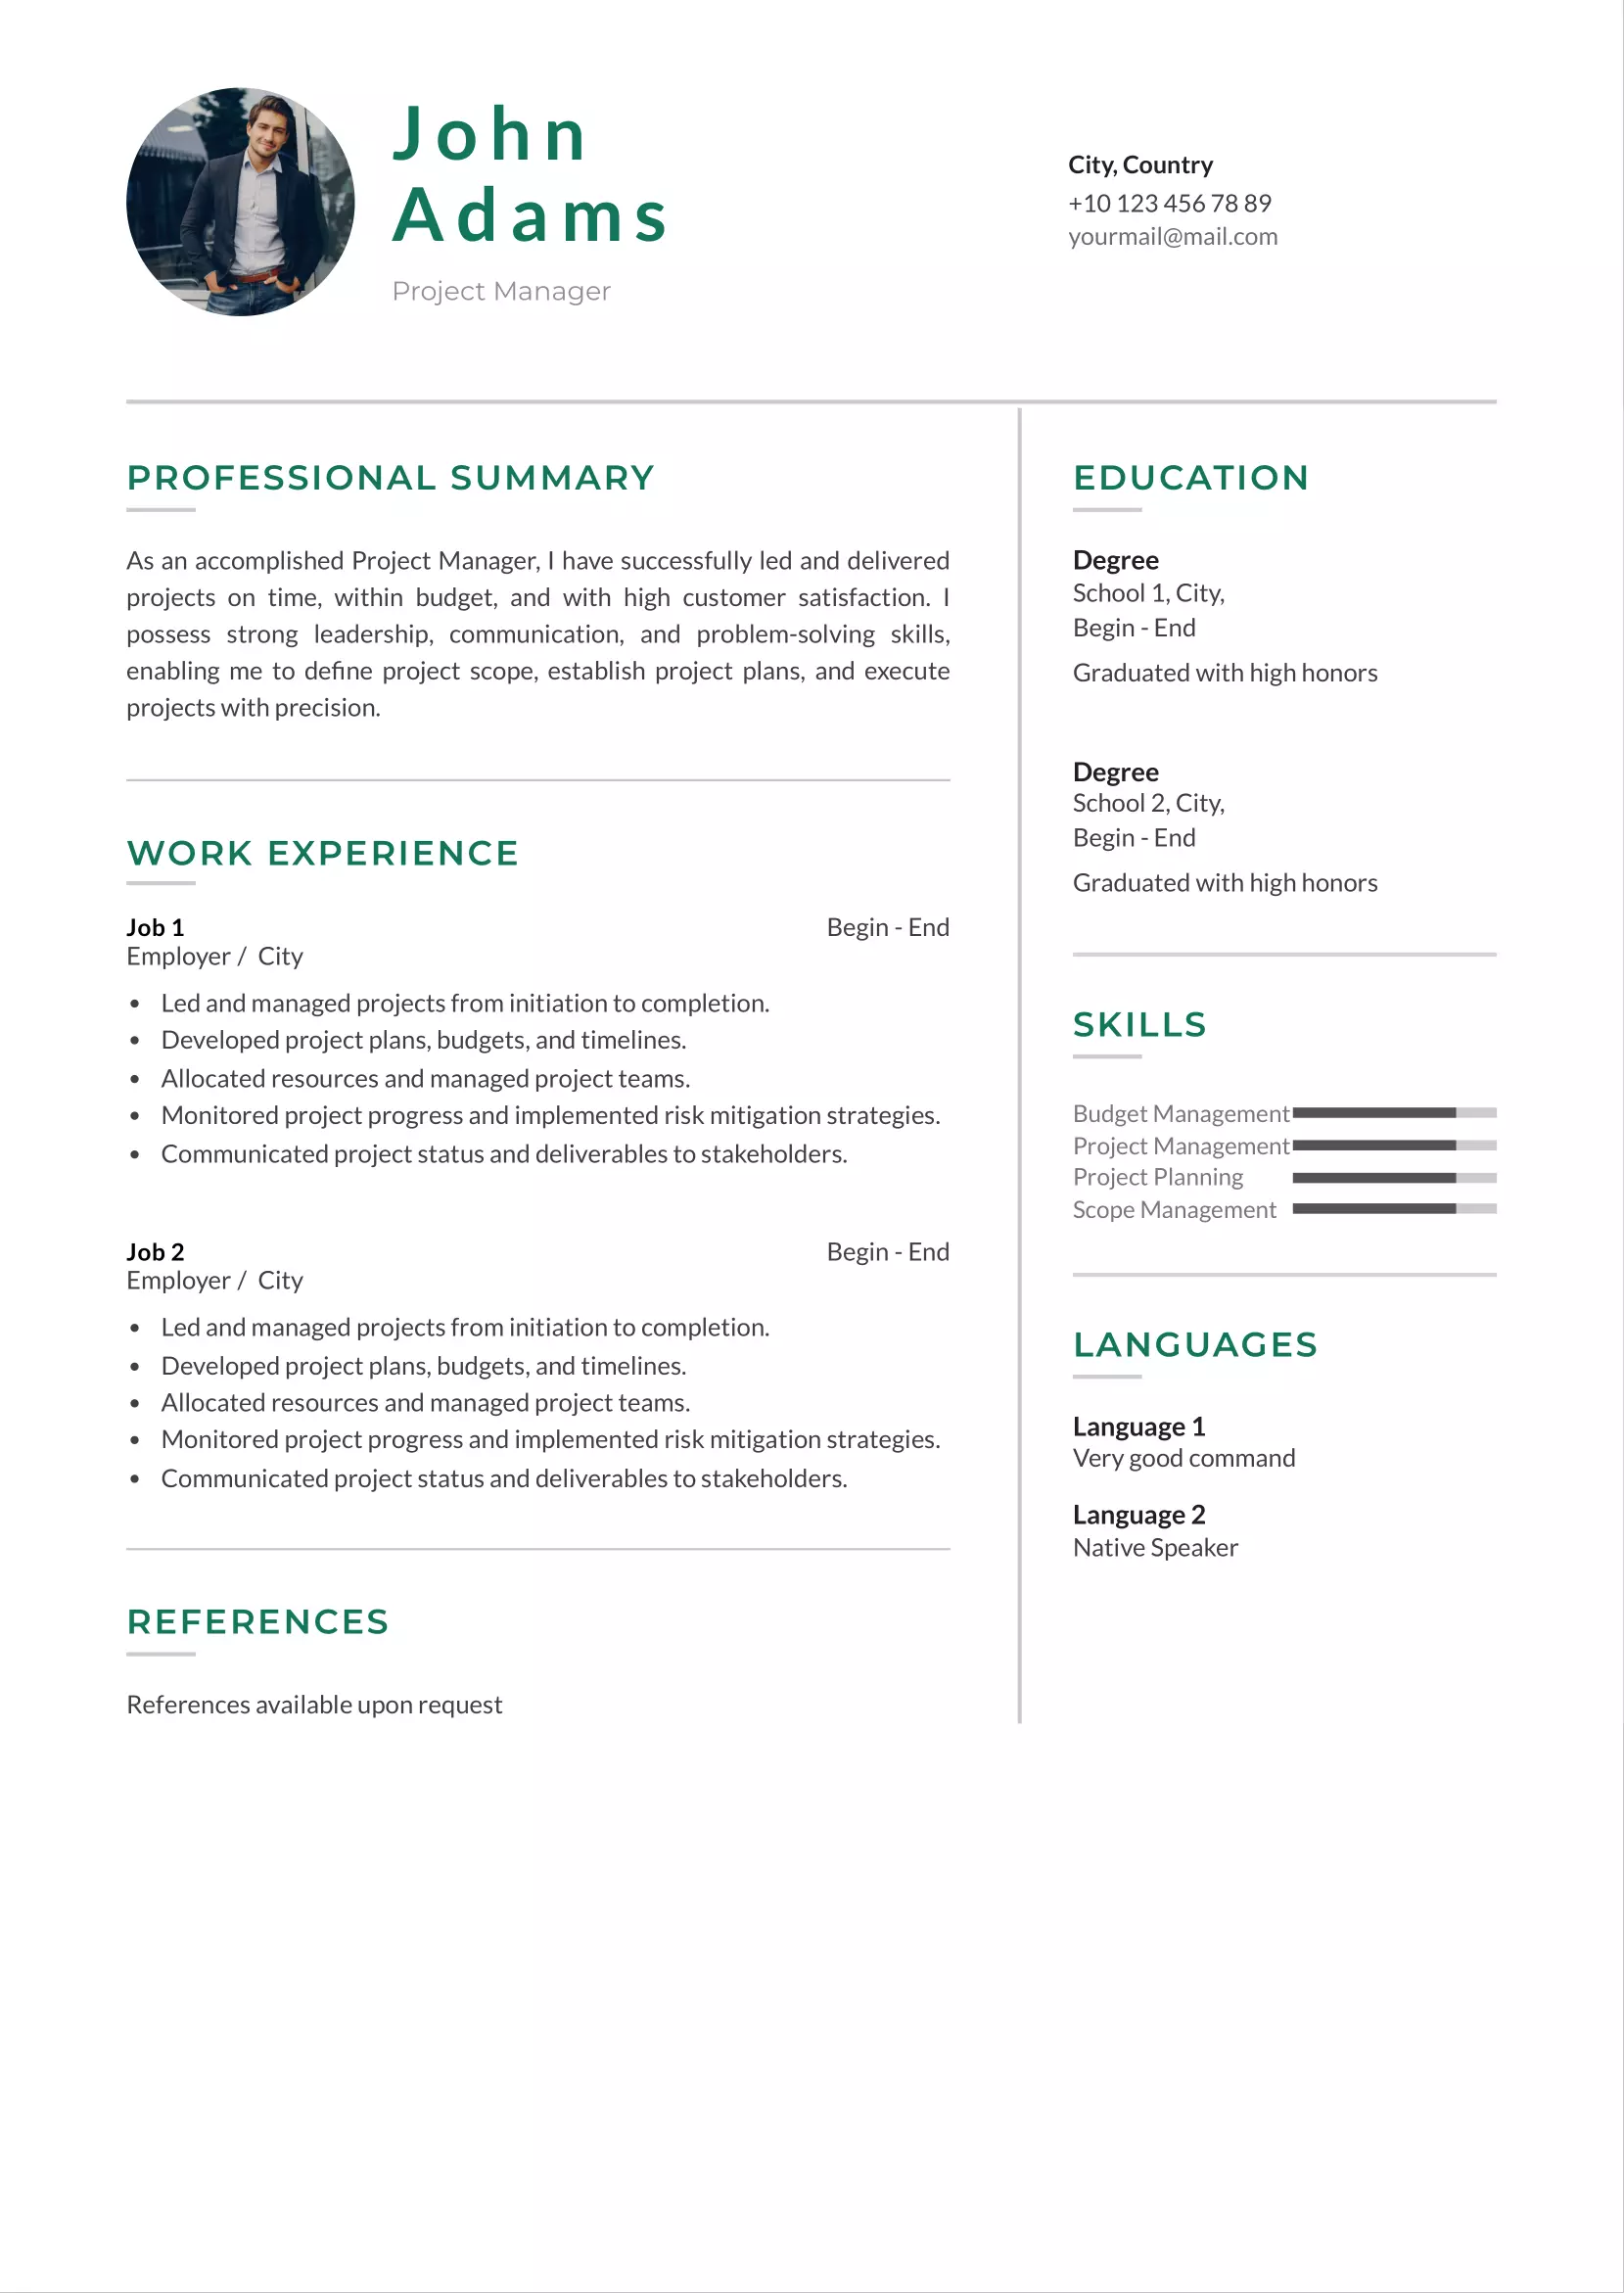 Project manager resume CV